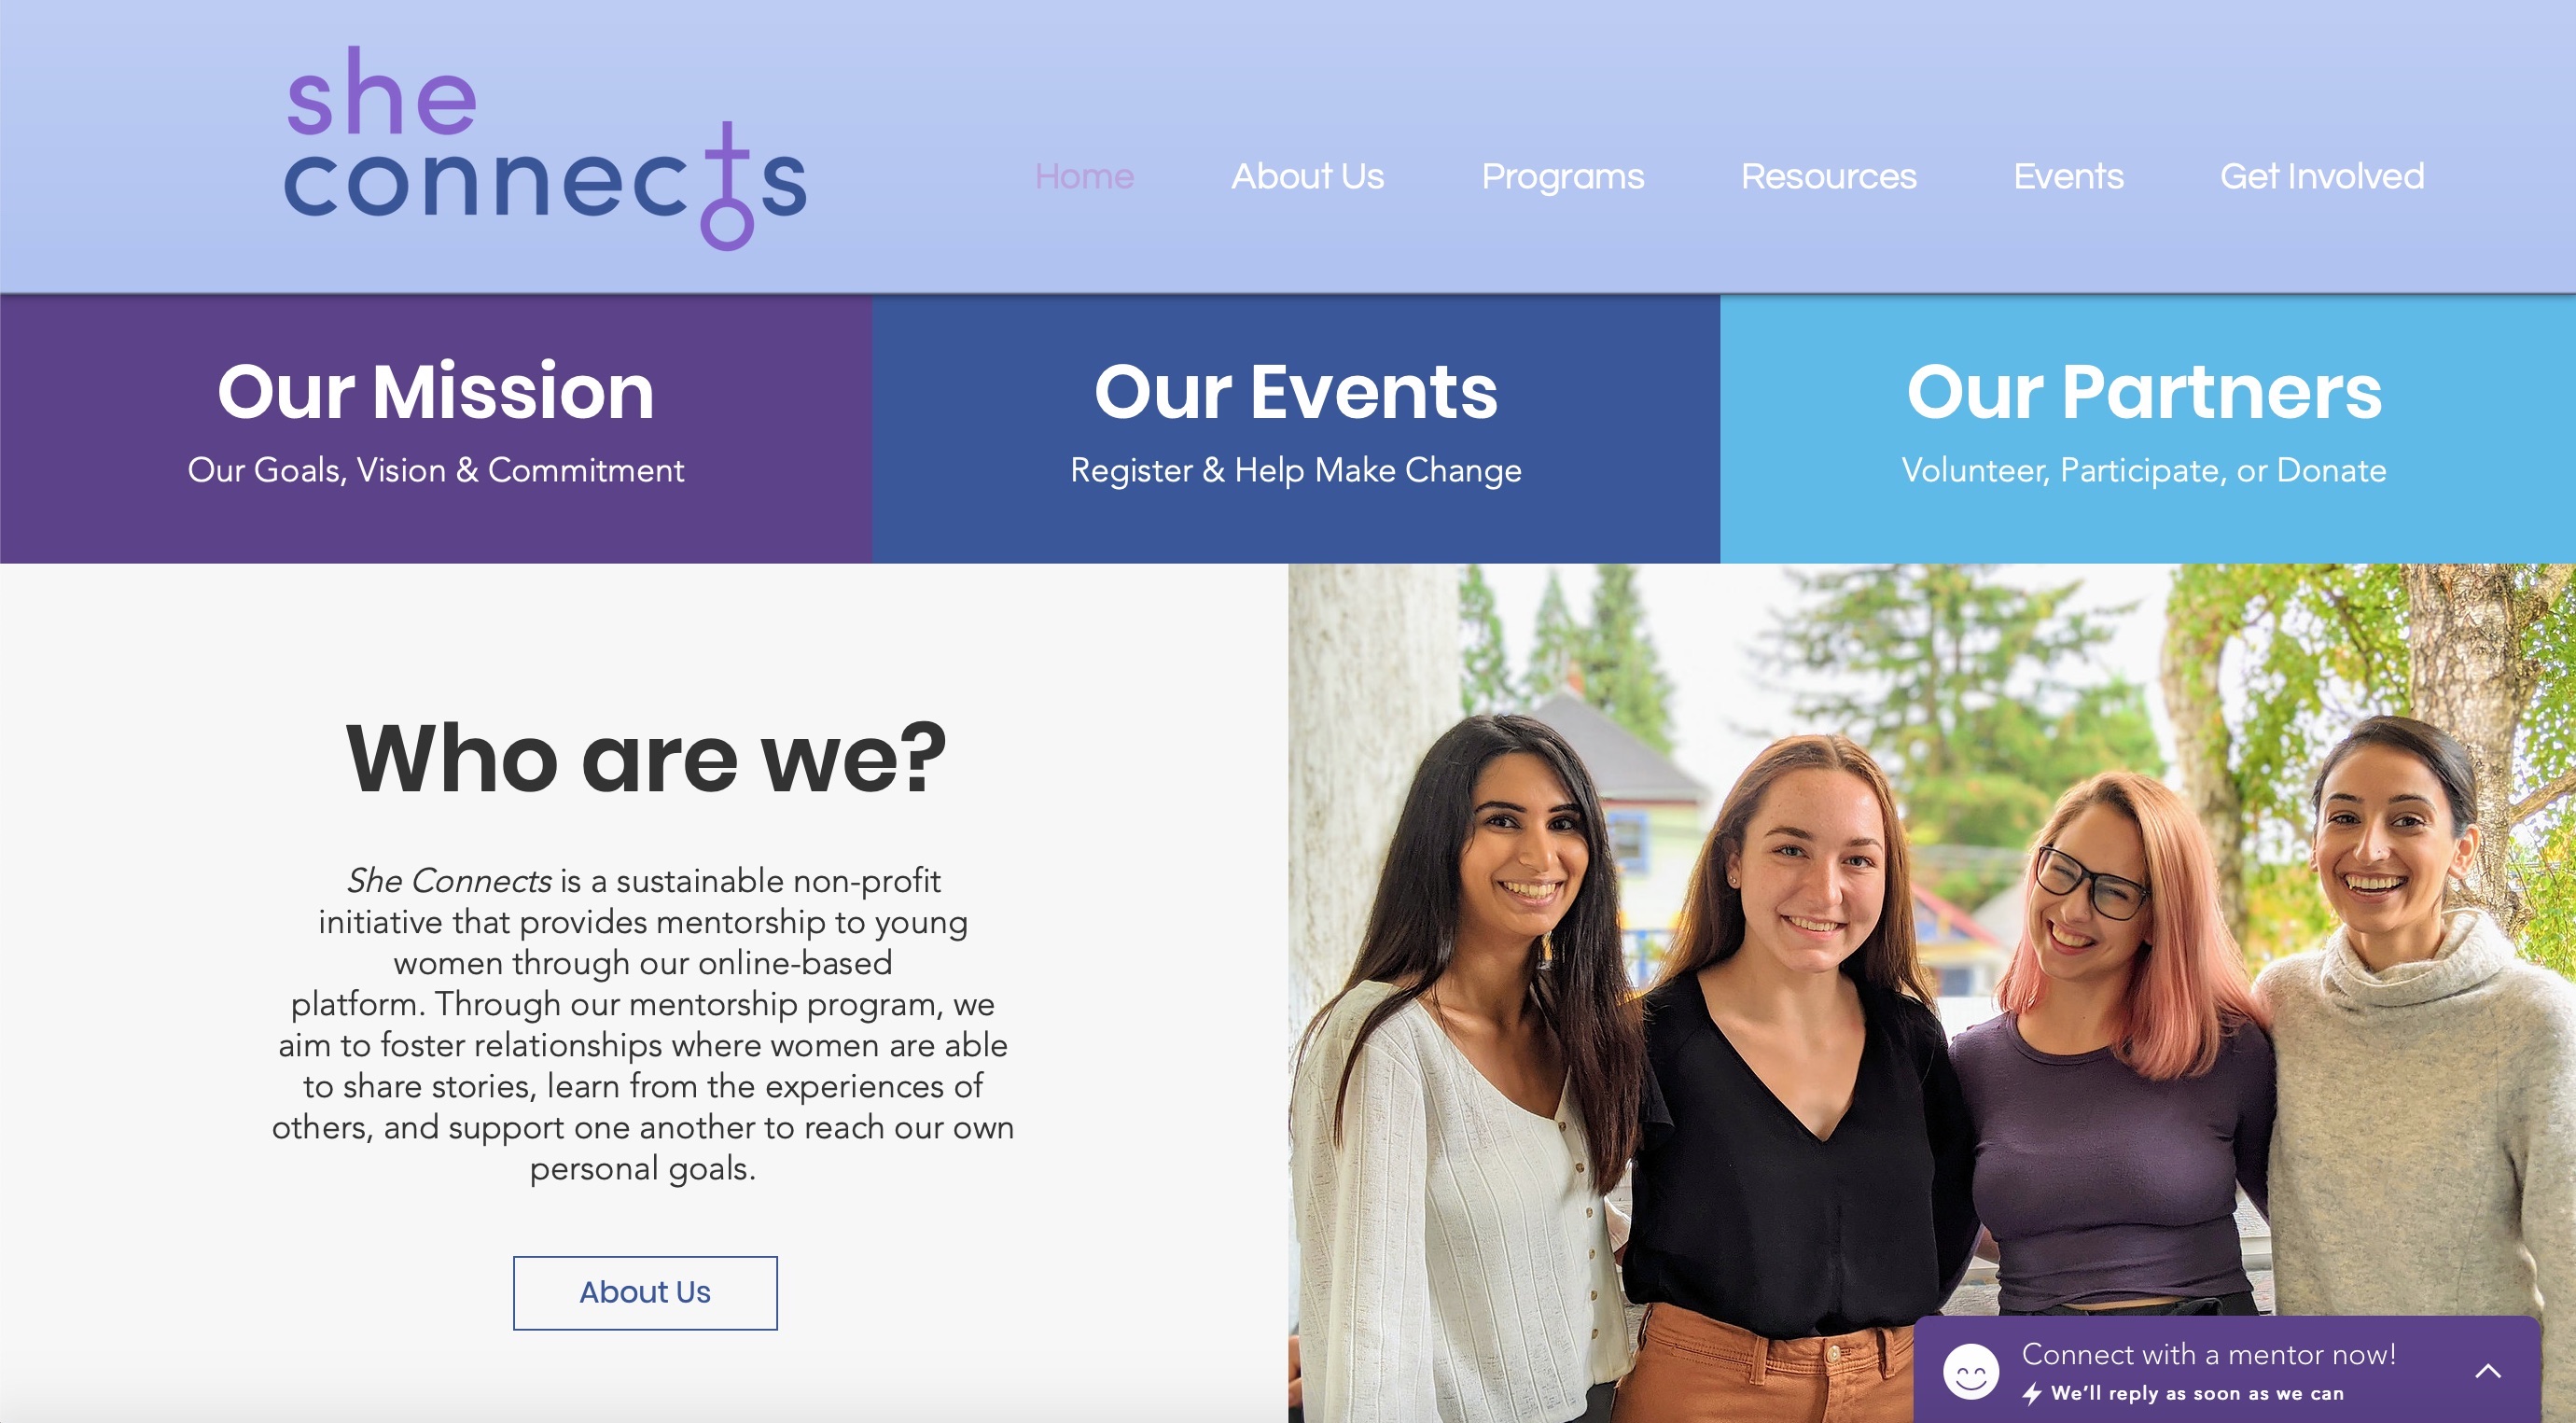 A snapshot of the She Connects website homepage.